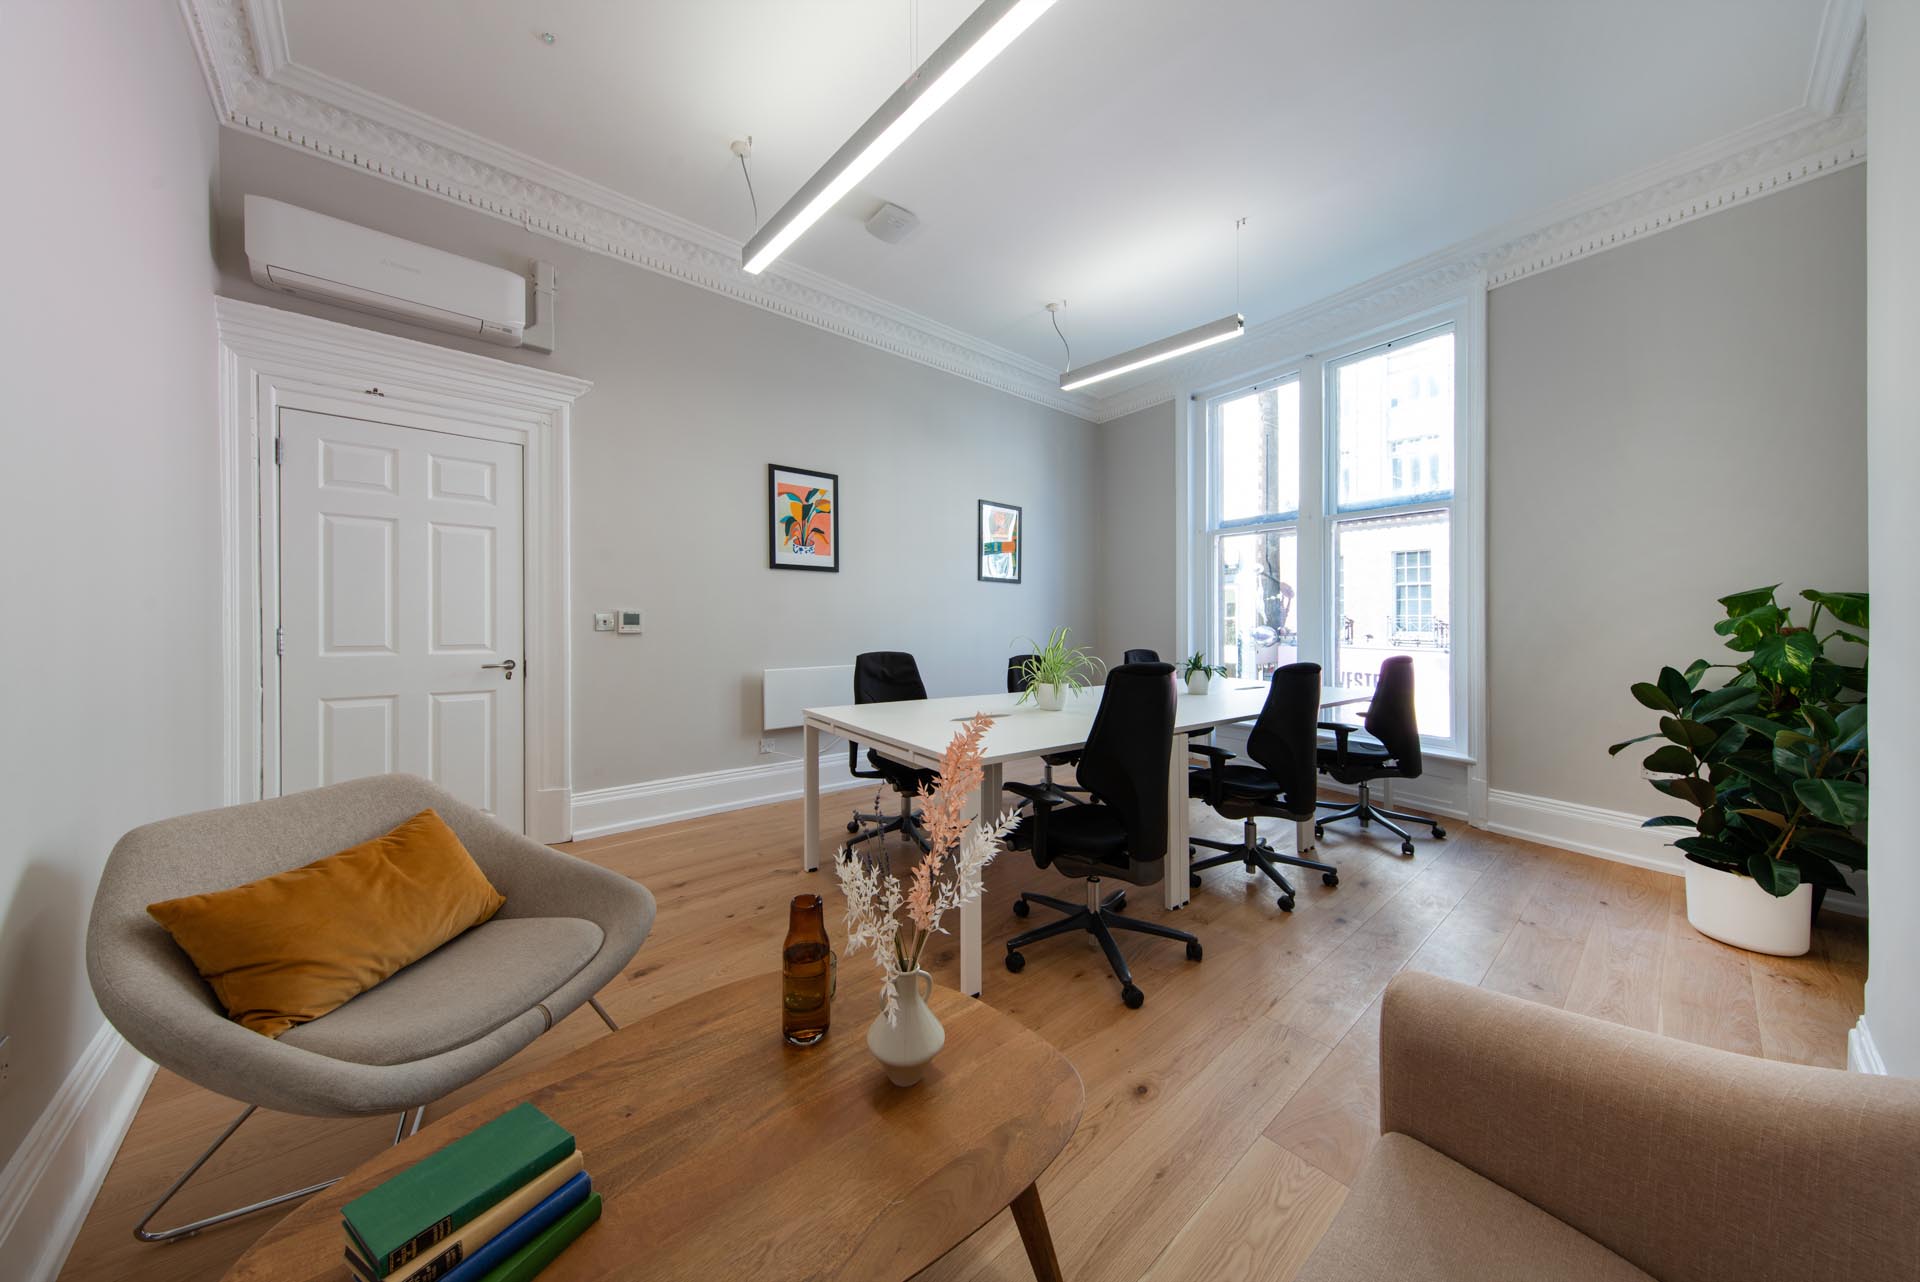 Offices for rent near Bond Street, Mayfair - West End London Workspaces